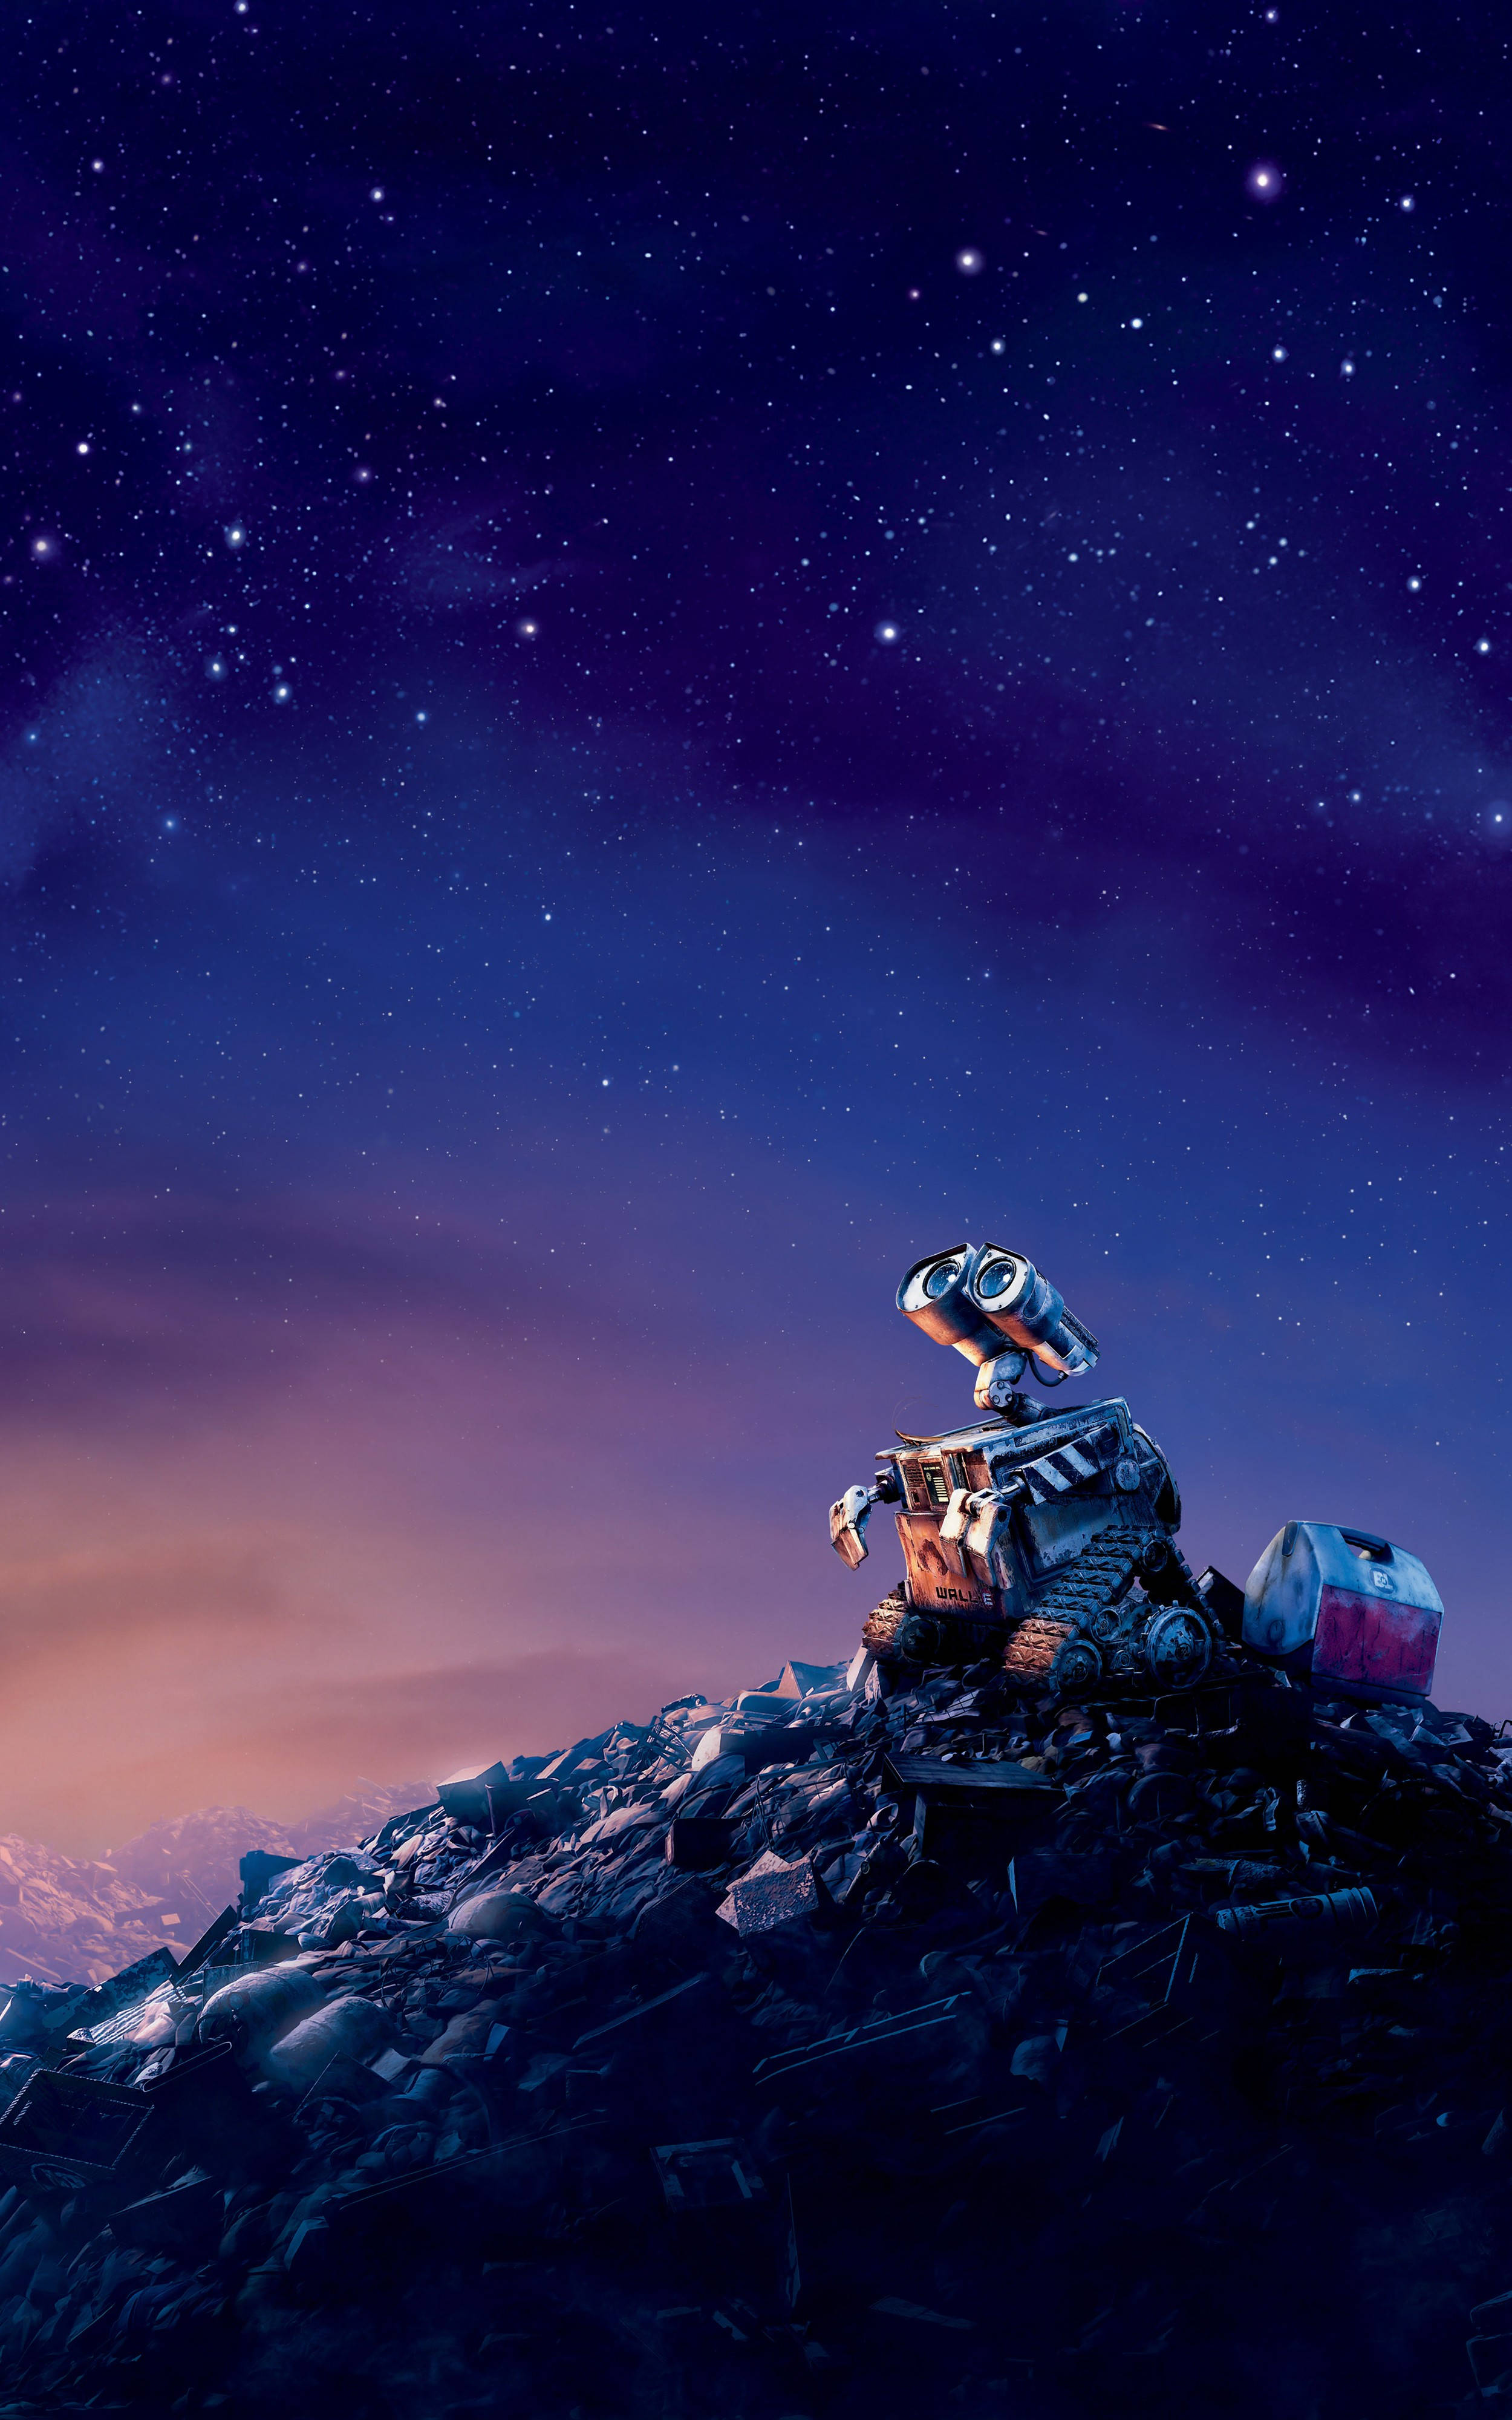 Mobile Wall-e Starry Sky Background